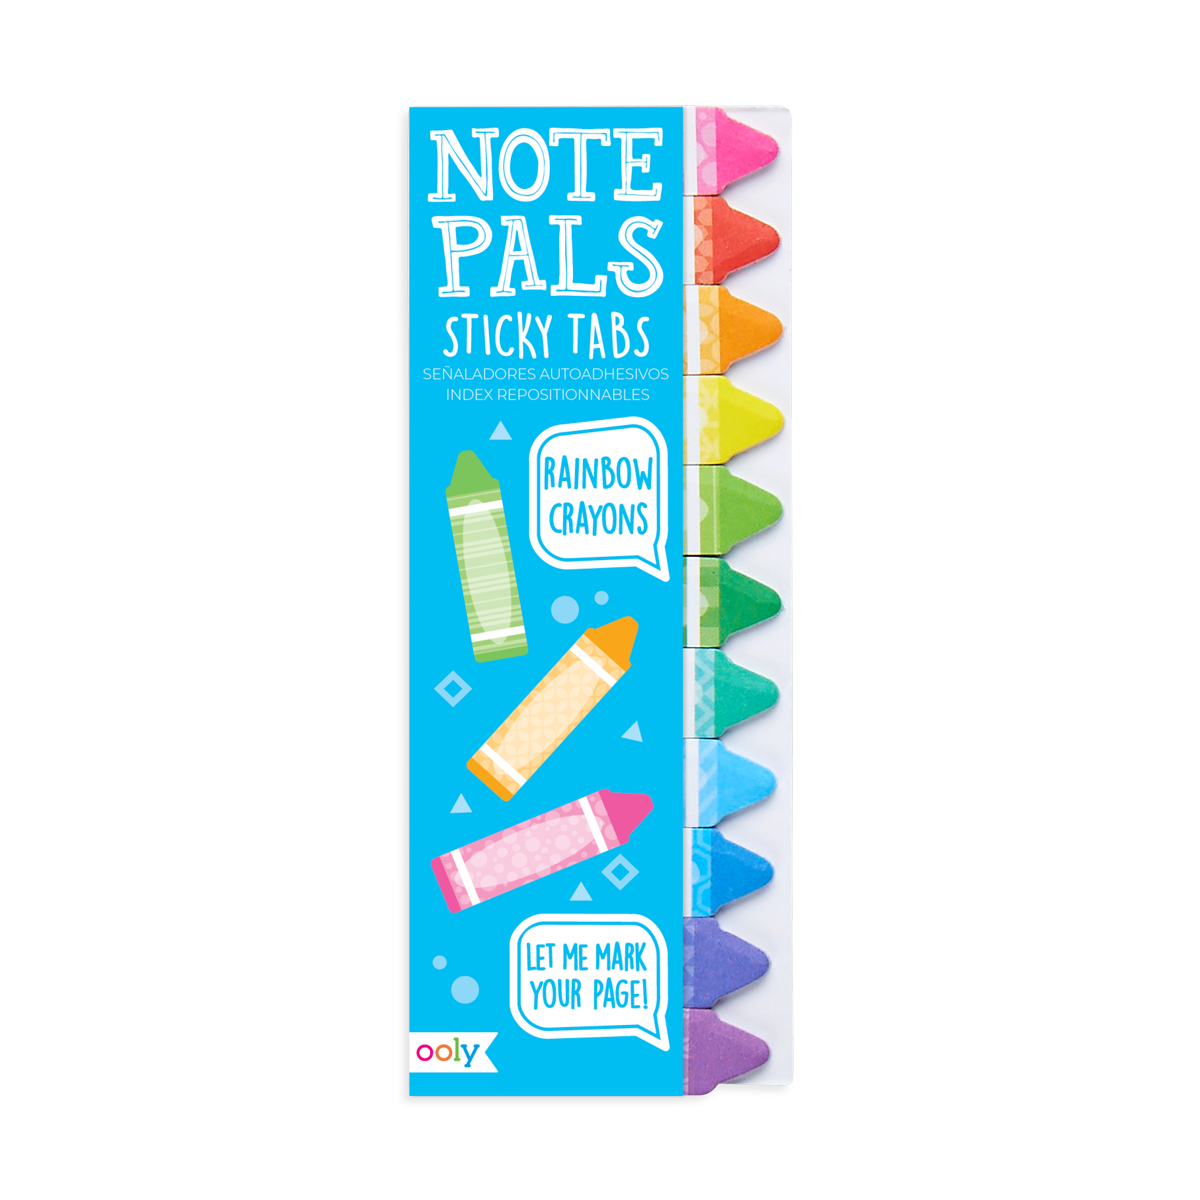 OOLY Note Pals Sticky Tabs - Rainbow Crayons in packaging